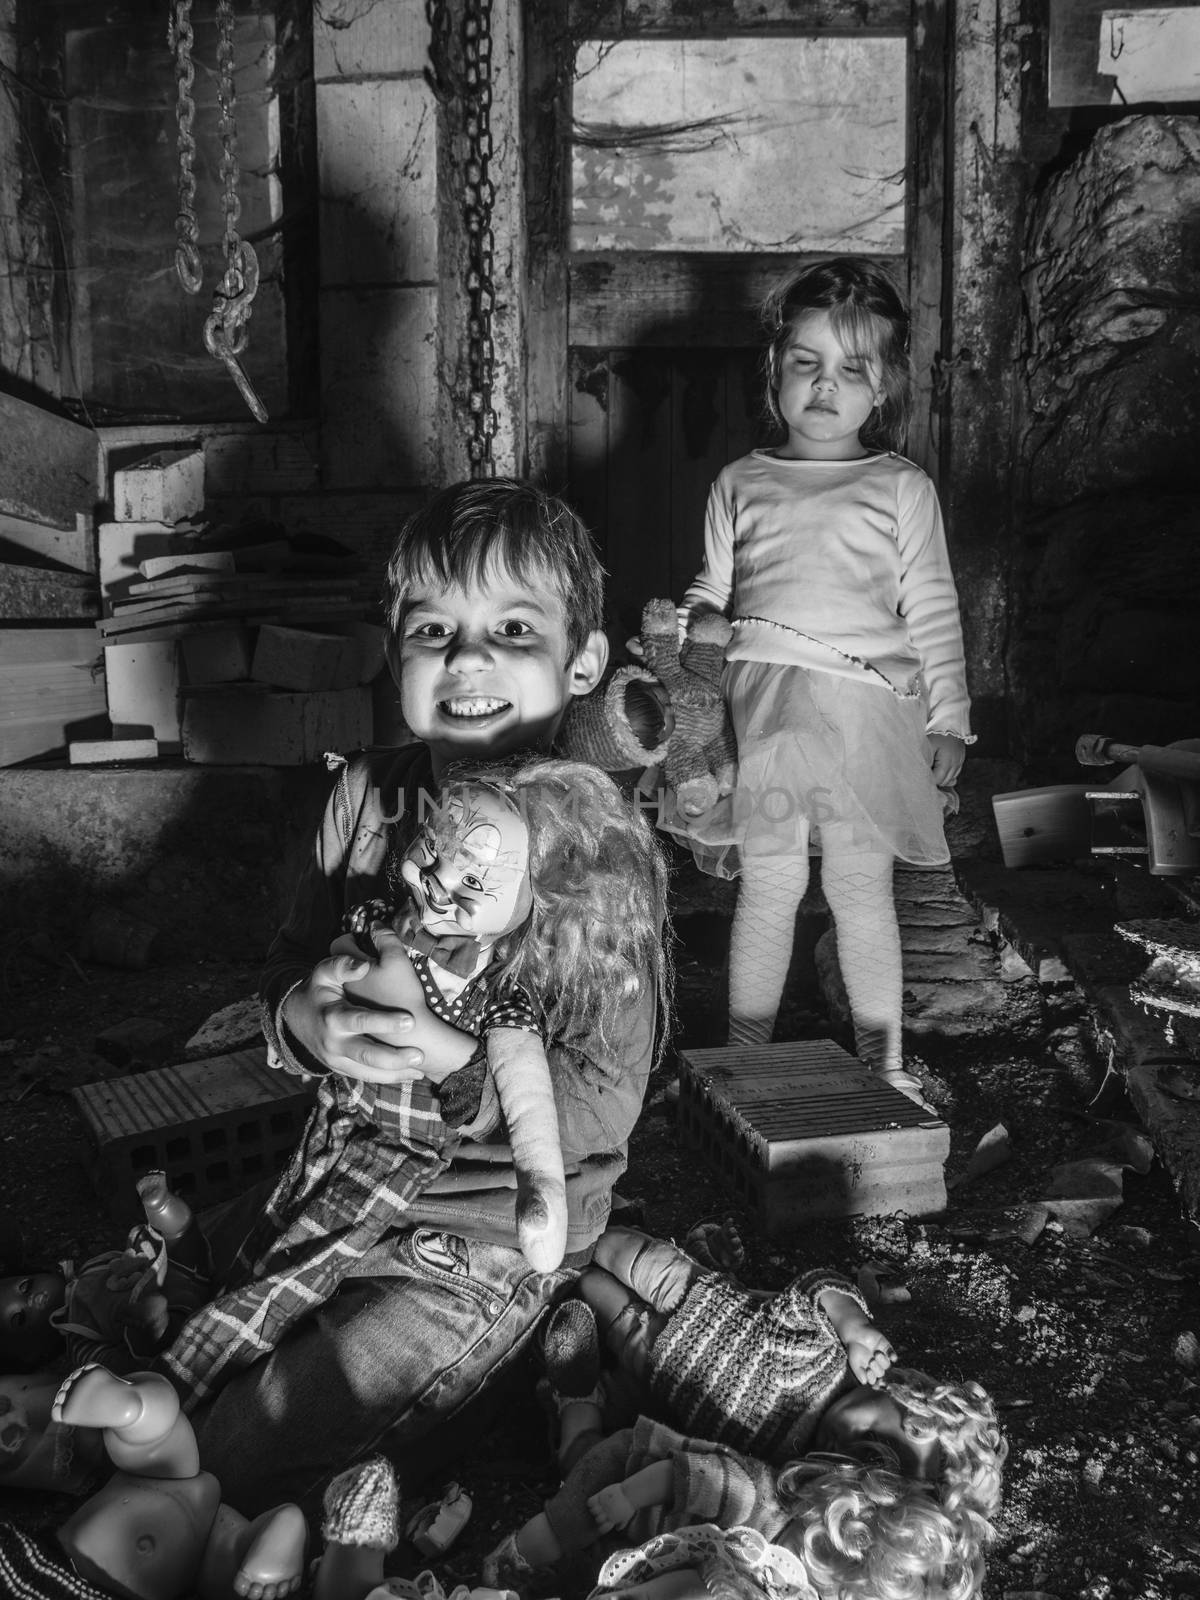 Creepy kids and scary dolls in the barn by sumners